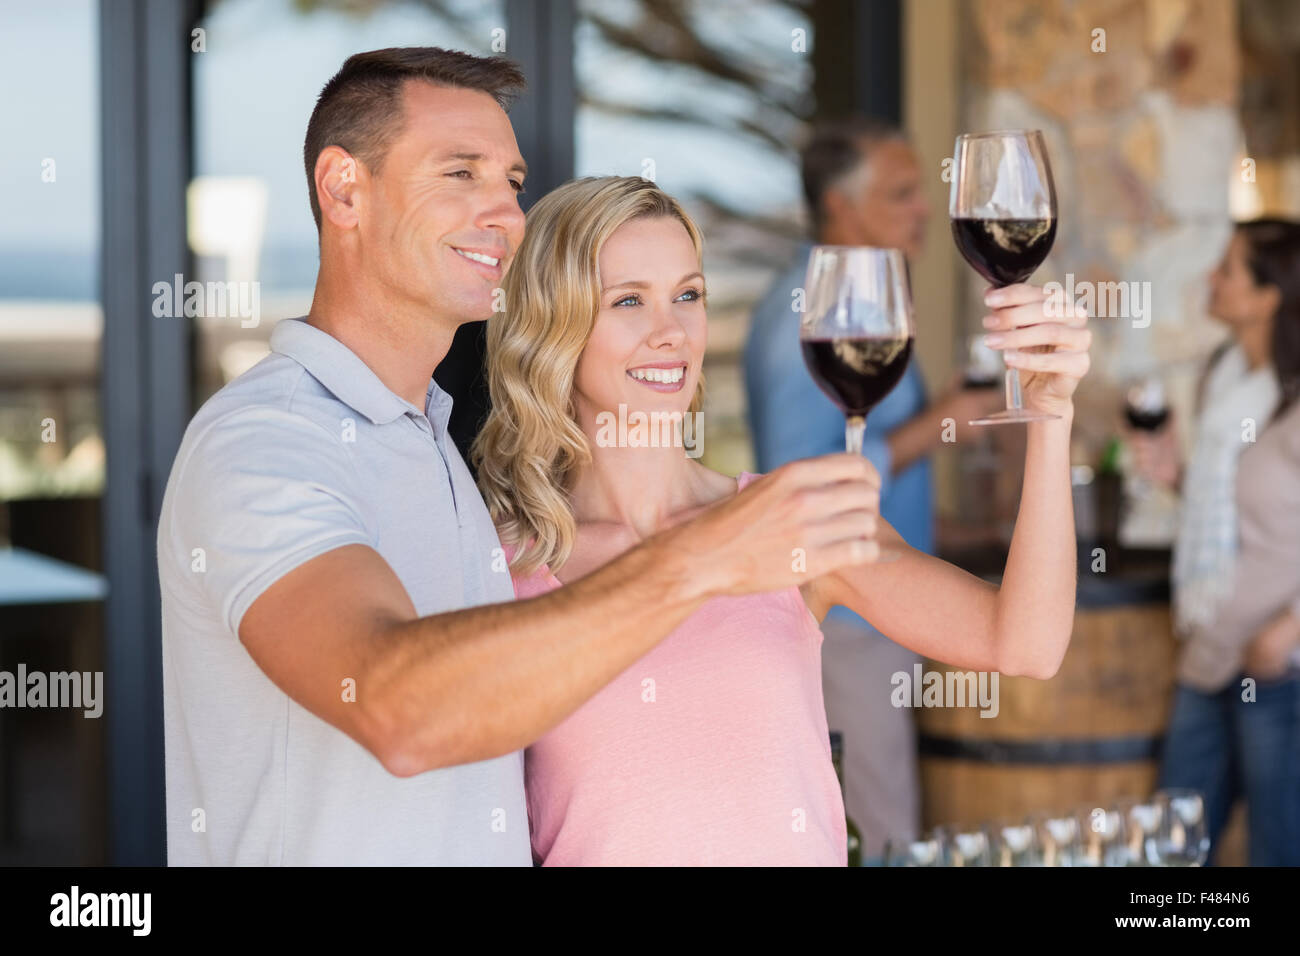 Smiling couple doing wine tasting and standing in front of couple drinking wine Stock Photo